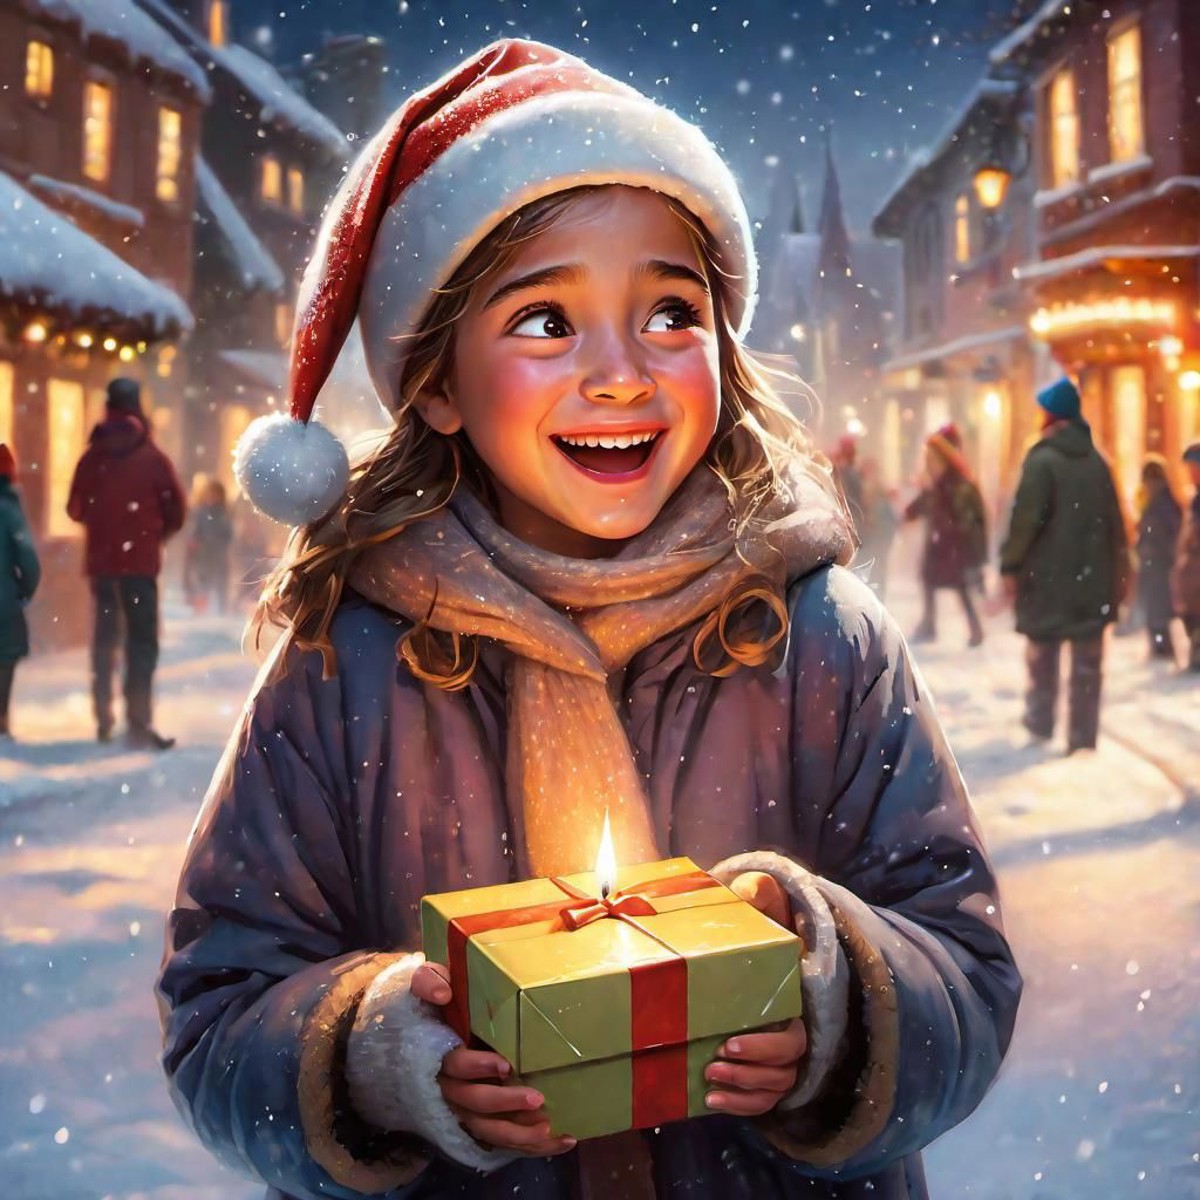 (a poor homeless young girl happily crying while receiving a gift from Santa Claus),kind-hearted people,snowy winter scene...